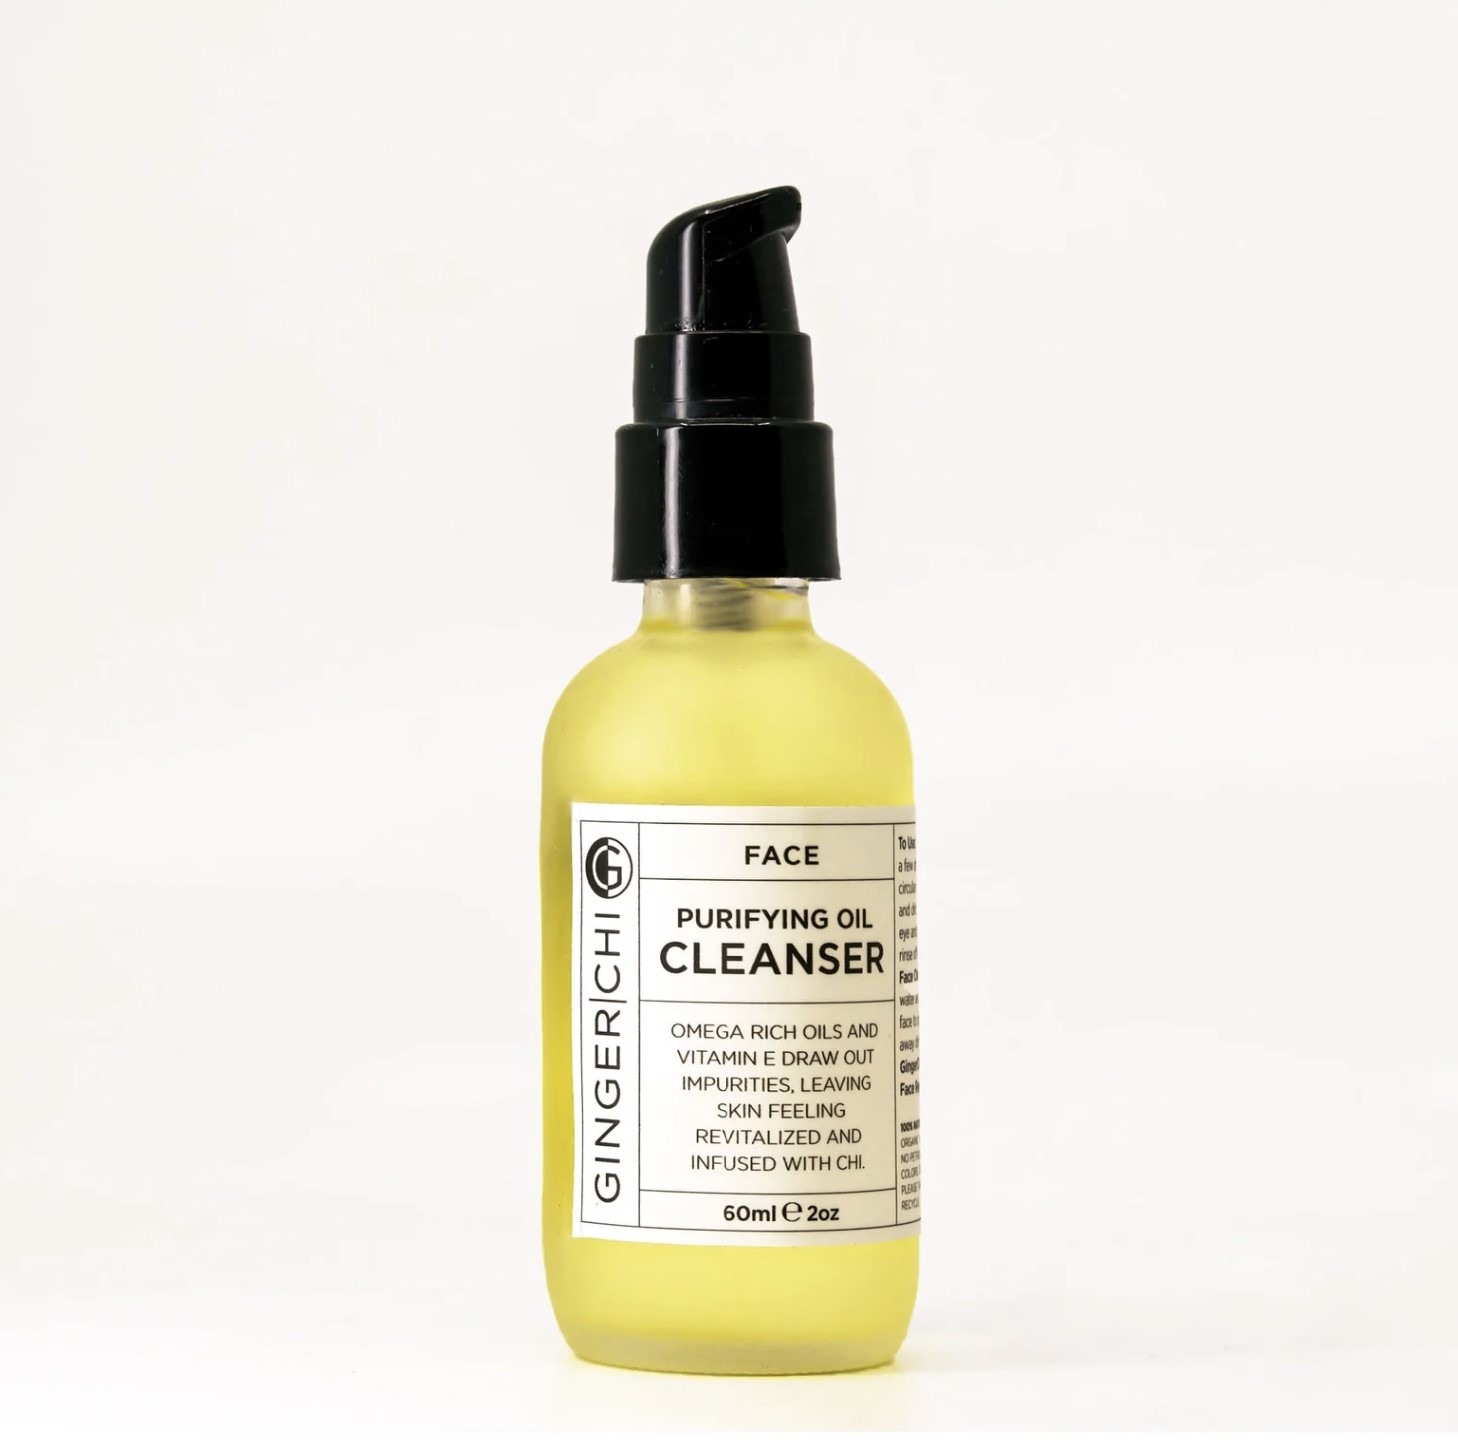 Purifying Oil Cleanser